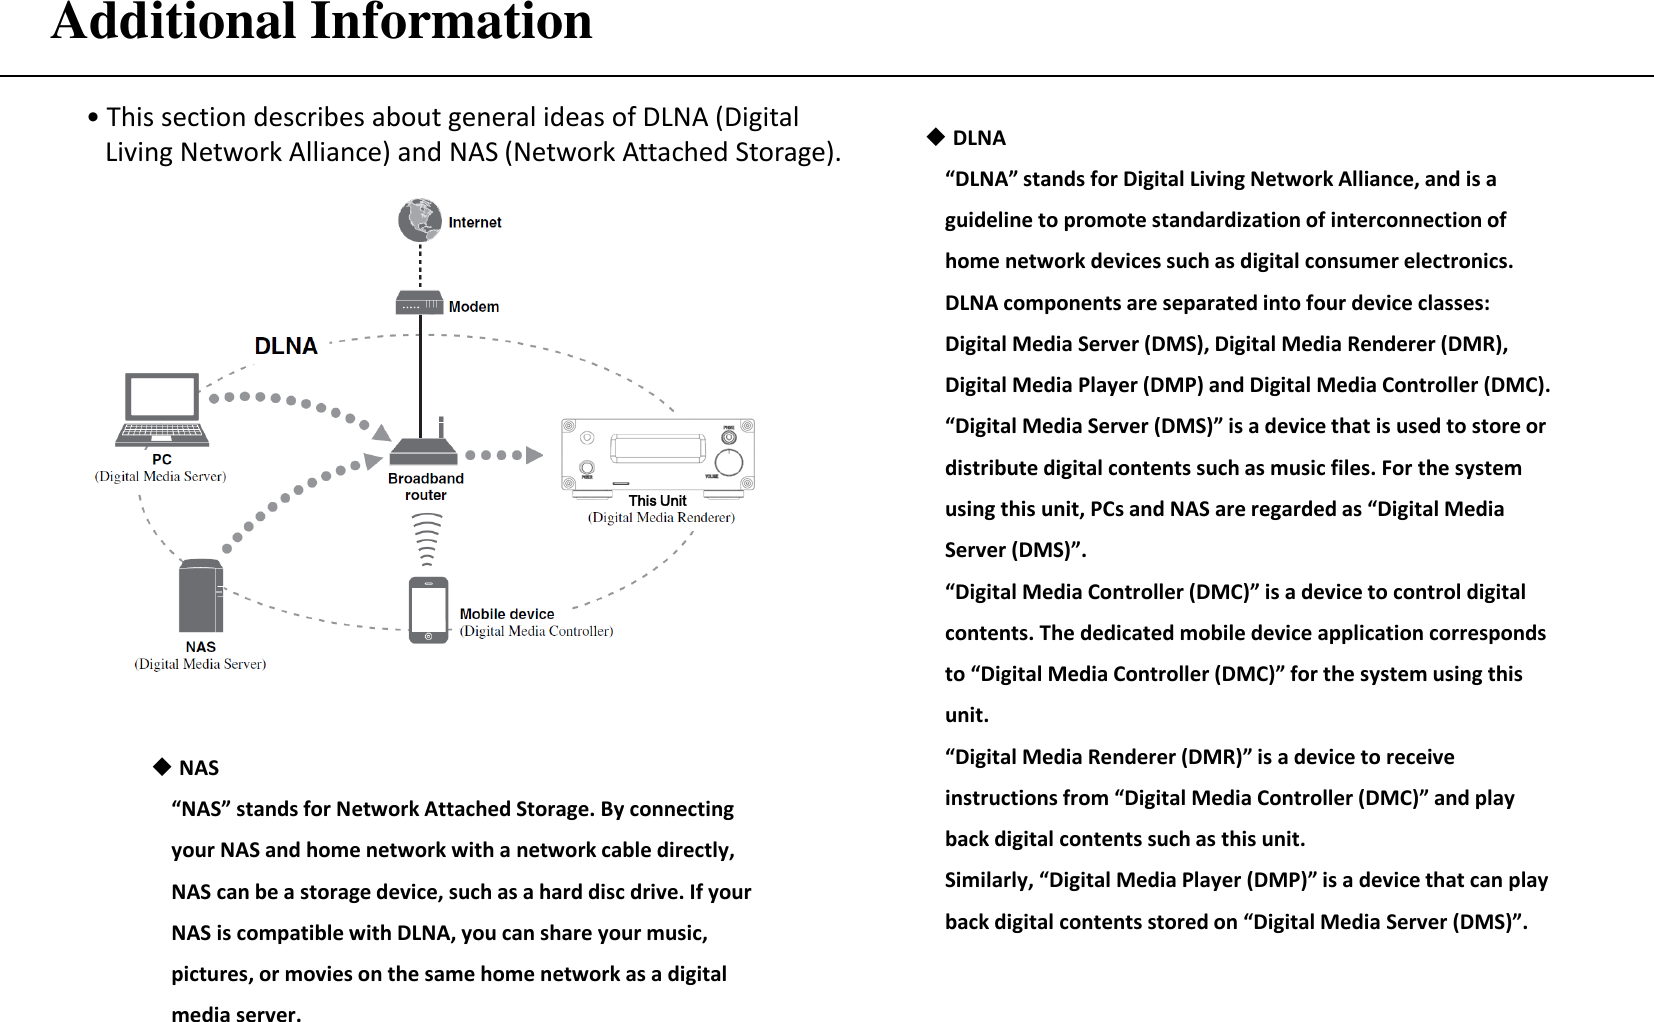 Additional Information • This section describes about general ideas of DLNA (Digital    Living Network Alliance) and NAS (Network Attached Storage). This Unit DLNA     “DLNA” stands for Digital Living Network Alliance, and is a      guideline to promote standardization of interconnection of     home network devices such as digital consumer electronics.     DLNA components are separated into four device classes:      Digital Media Server (DMS), Digital Media Renderer (DMR),     Digital Media Player (DMP) and Digital Media Controller (DMC).     “Digital Media Server (DMS)” is a device that is used to store or        distribute digital contents such as music files. For the system      using this unit, PCs and NAS are regarded as “Digital Media      Server (DMS)”.     “Digital Media Controller (DMC)” is a device to control digital      contents. The dedicated mobile device application corresponds      to “Digital Media Controller (DMC)” for the system using this      unit.     “Digital Media Renderer (DMR)” is a device to receive      instructions from “Digital Media Controller (DMC)” and play     back digital contents such as this unit.     Similarly, “Digital Media Player (DMP)” is a device that can play      back digital contents stored on “Digital Media Server (DMS)”. NAS     “NAS” stands for Network Attached Storage. By connecting         your NAS and home network with a network cable directly,     NAS can be a storage device, such as a hard disc drive. If your      NAS is compatible with DLNA, you can share your music,      pictures, or movies on the same home network as a digital      media server. 